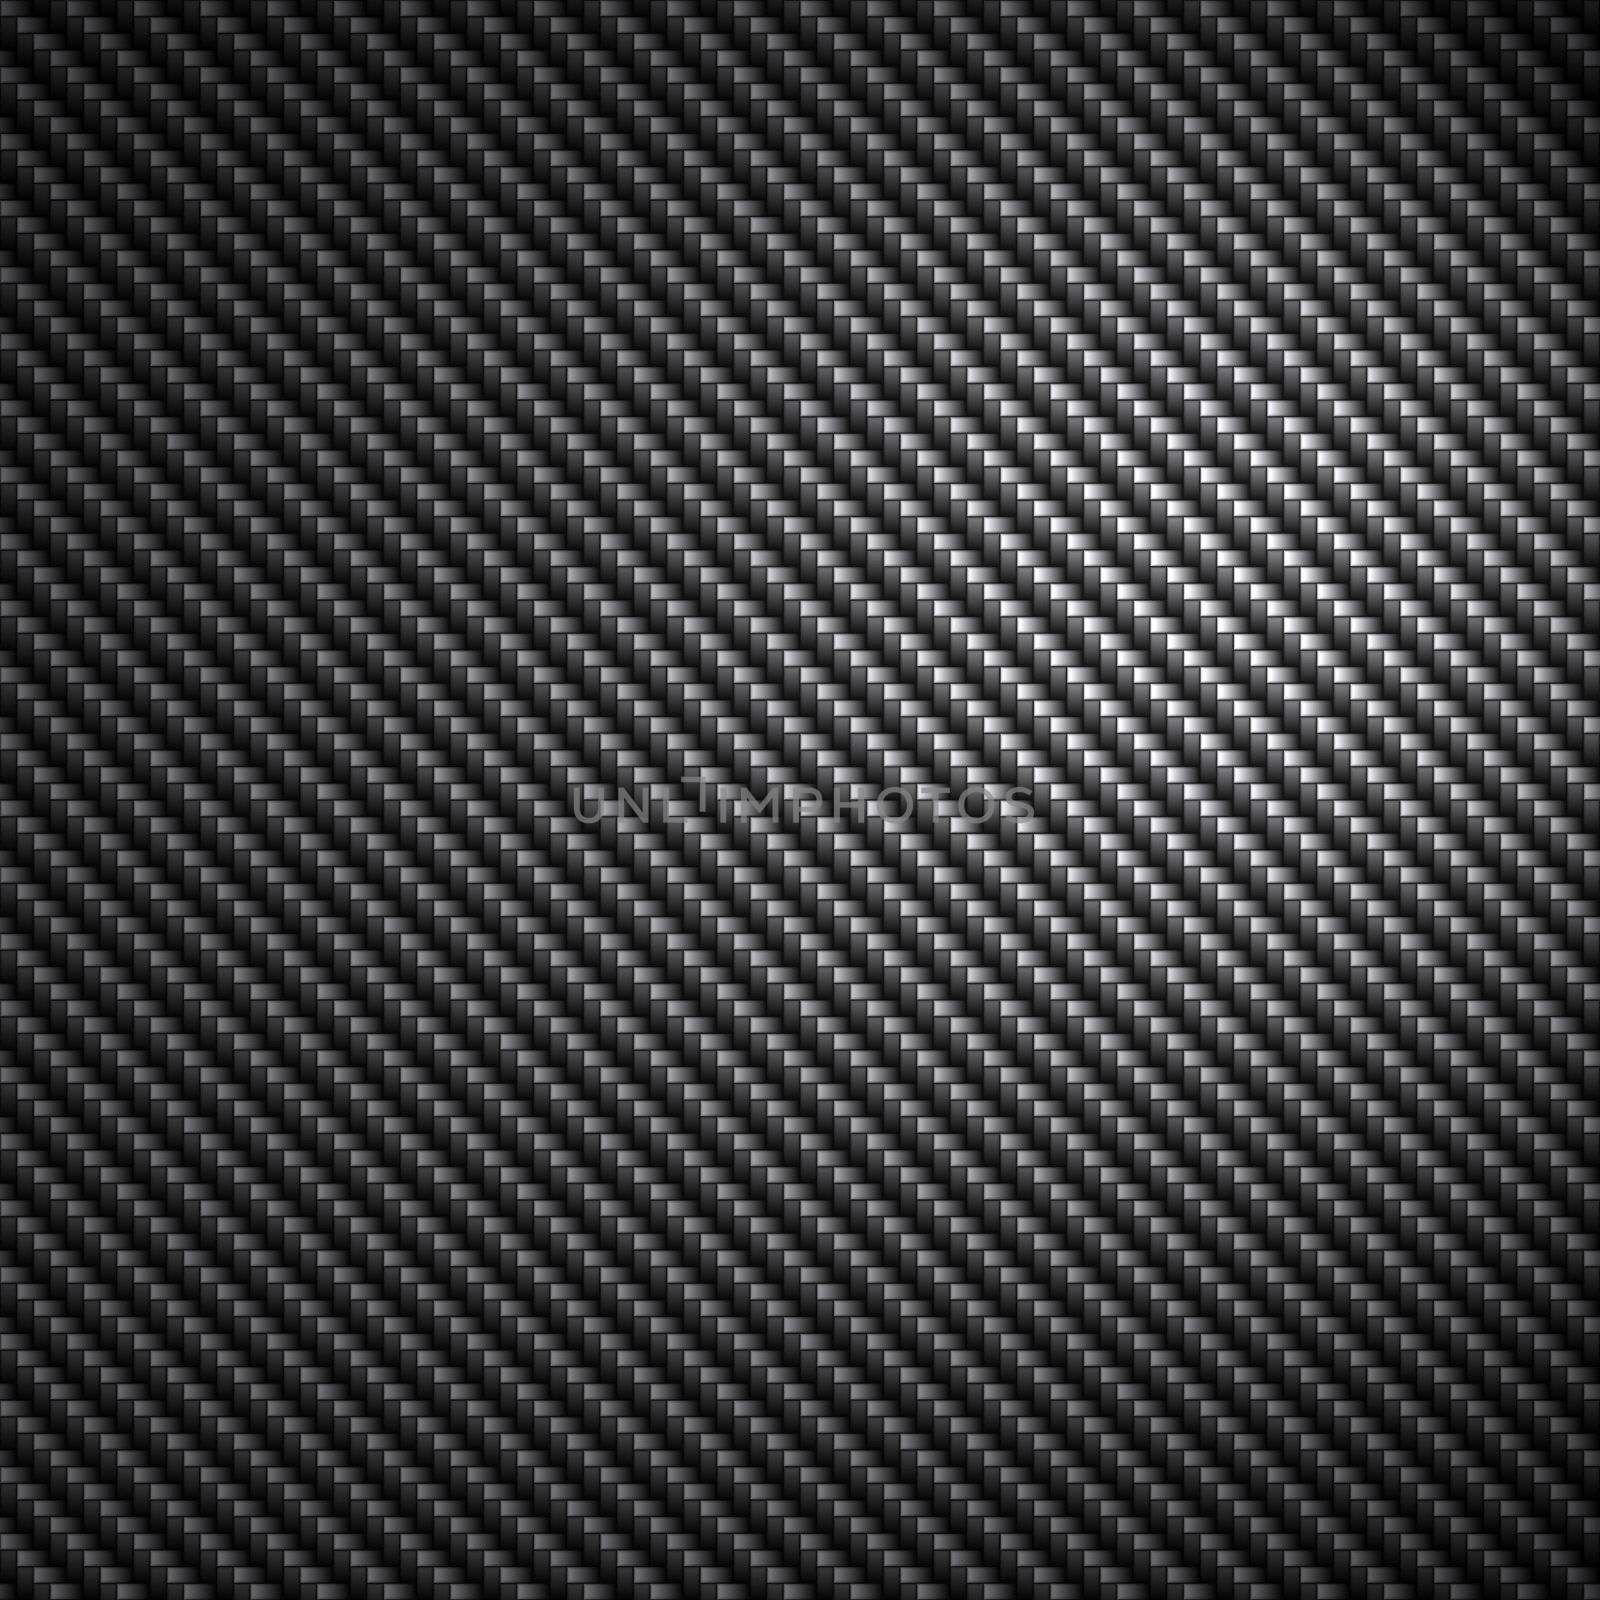 A black carbon fiber background texture with reflective highlights.